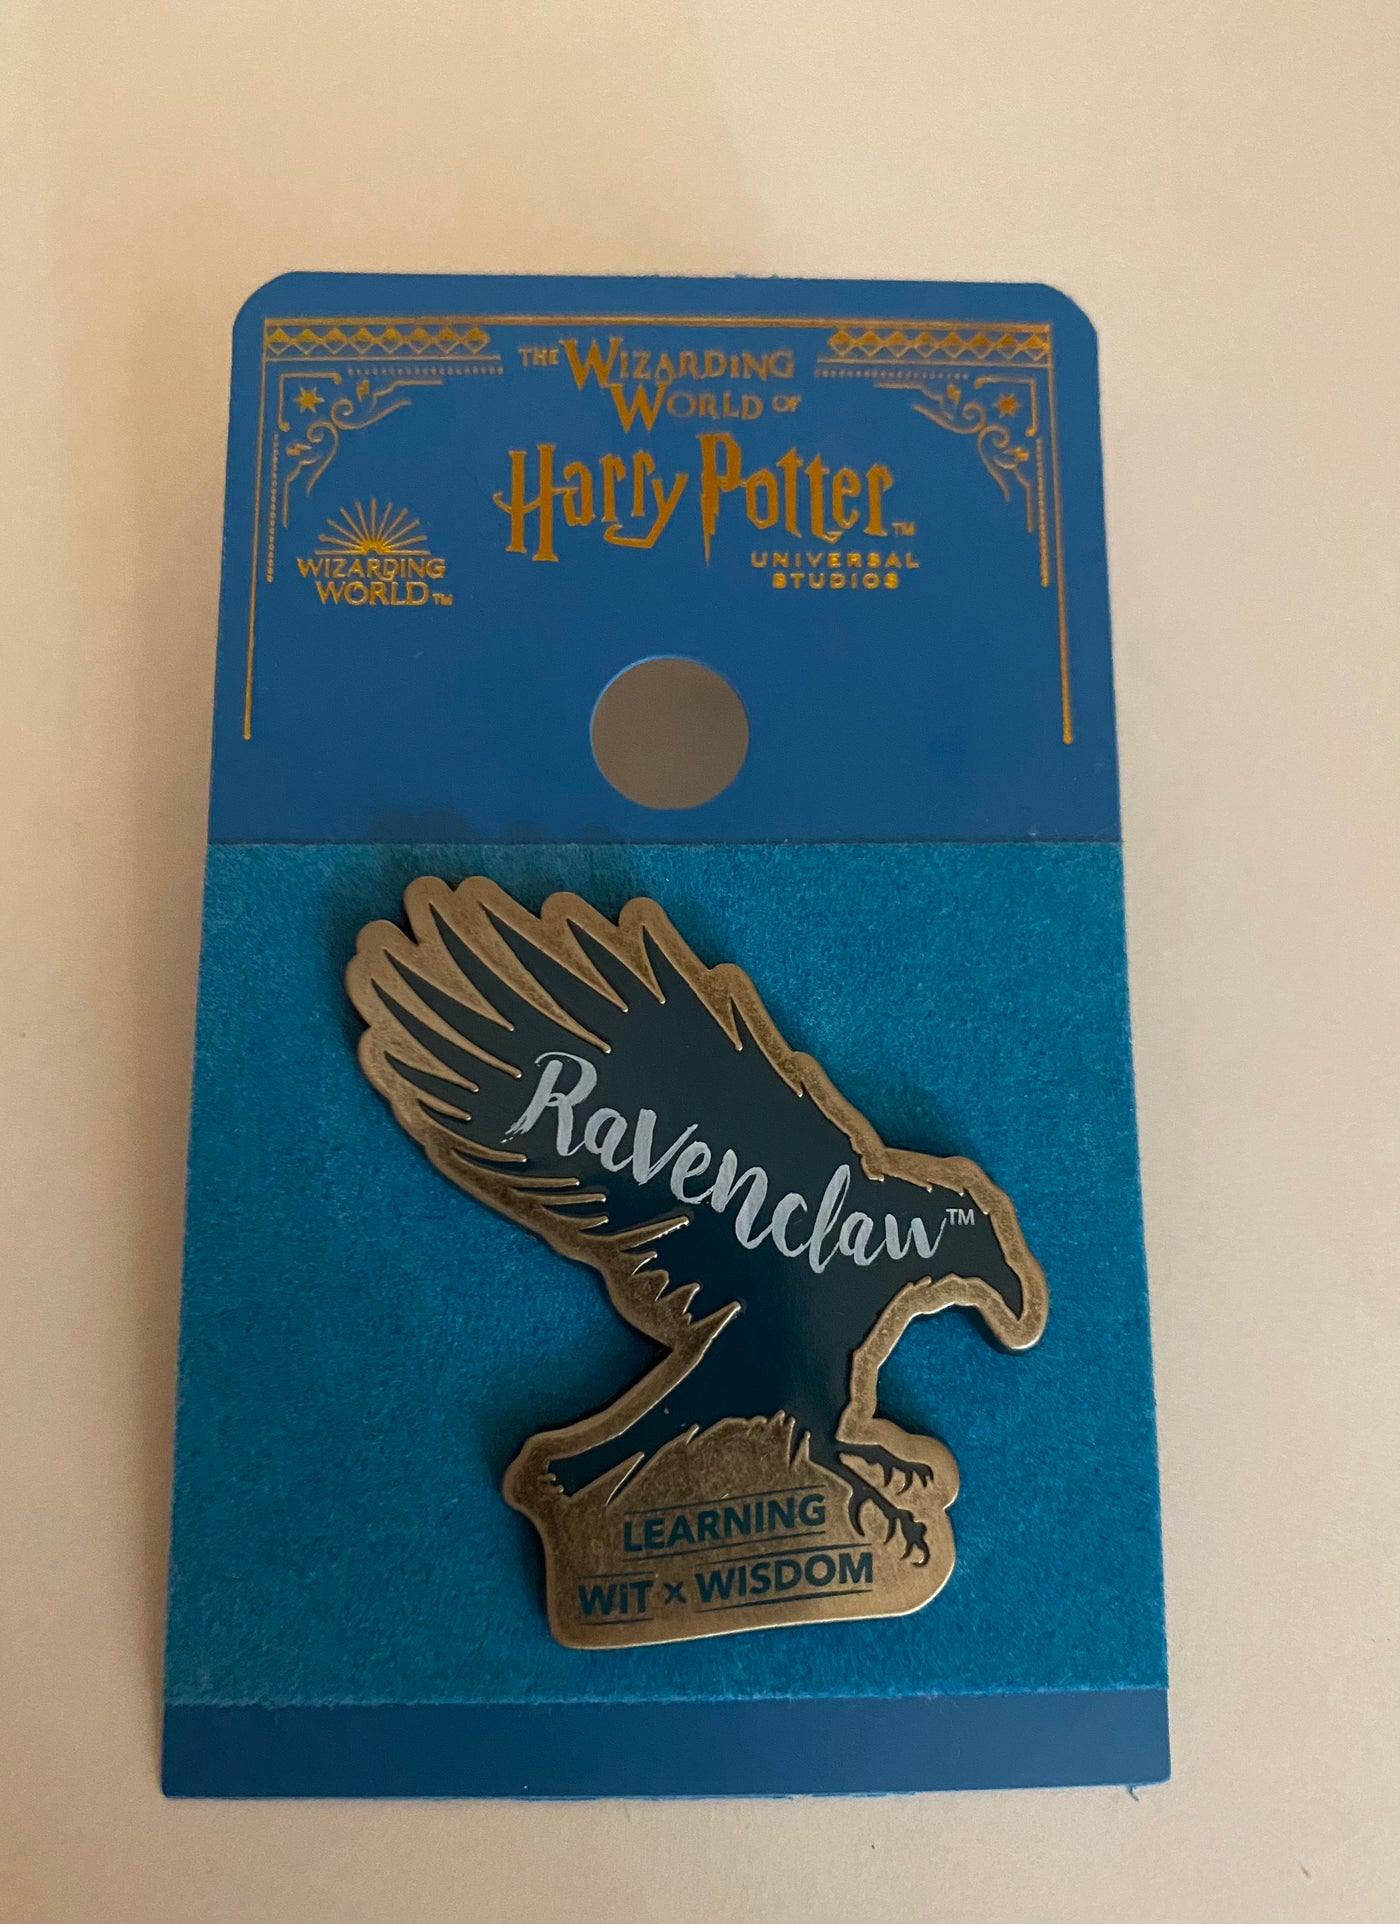 Universal Studios Harry Potter Ravenclaw Learning Wit Wisdom Pin New with Card